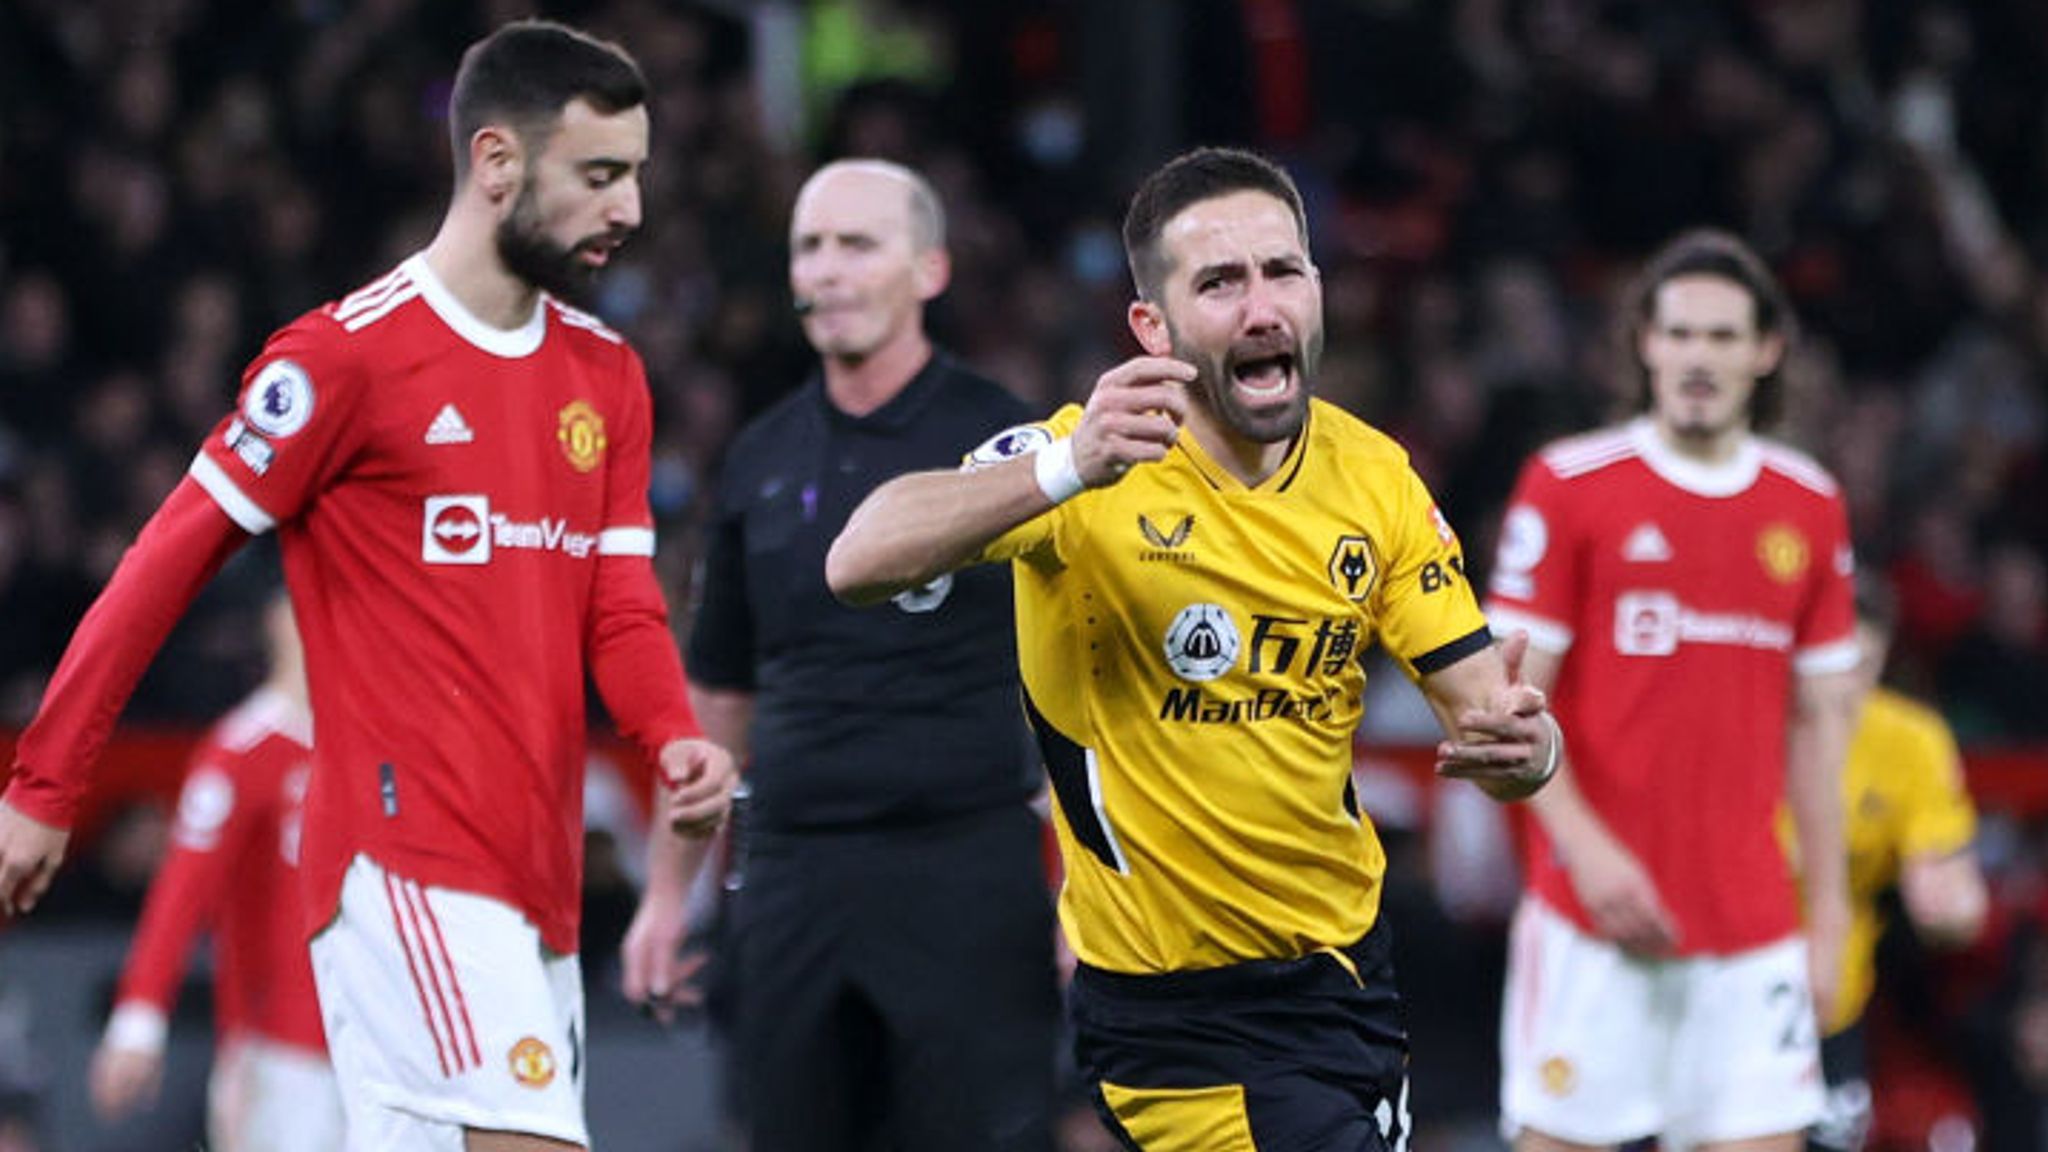 Man Utd 0-1 Wolves: Late Joao Moutinho strike sees Wolves win first league  game at Old Trafford in 42 years | Football News | Sky Sports